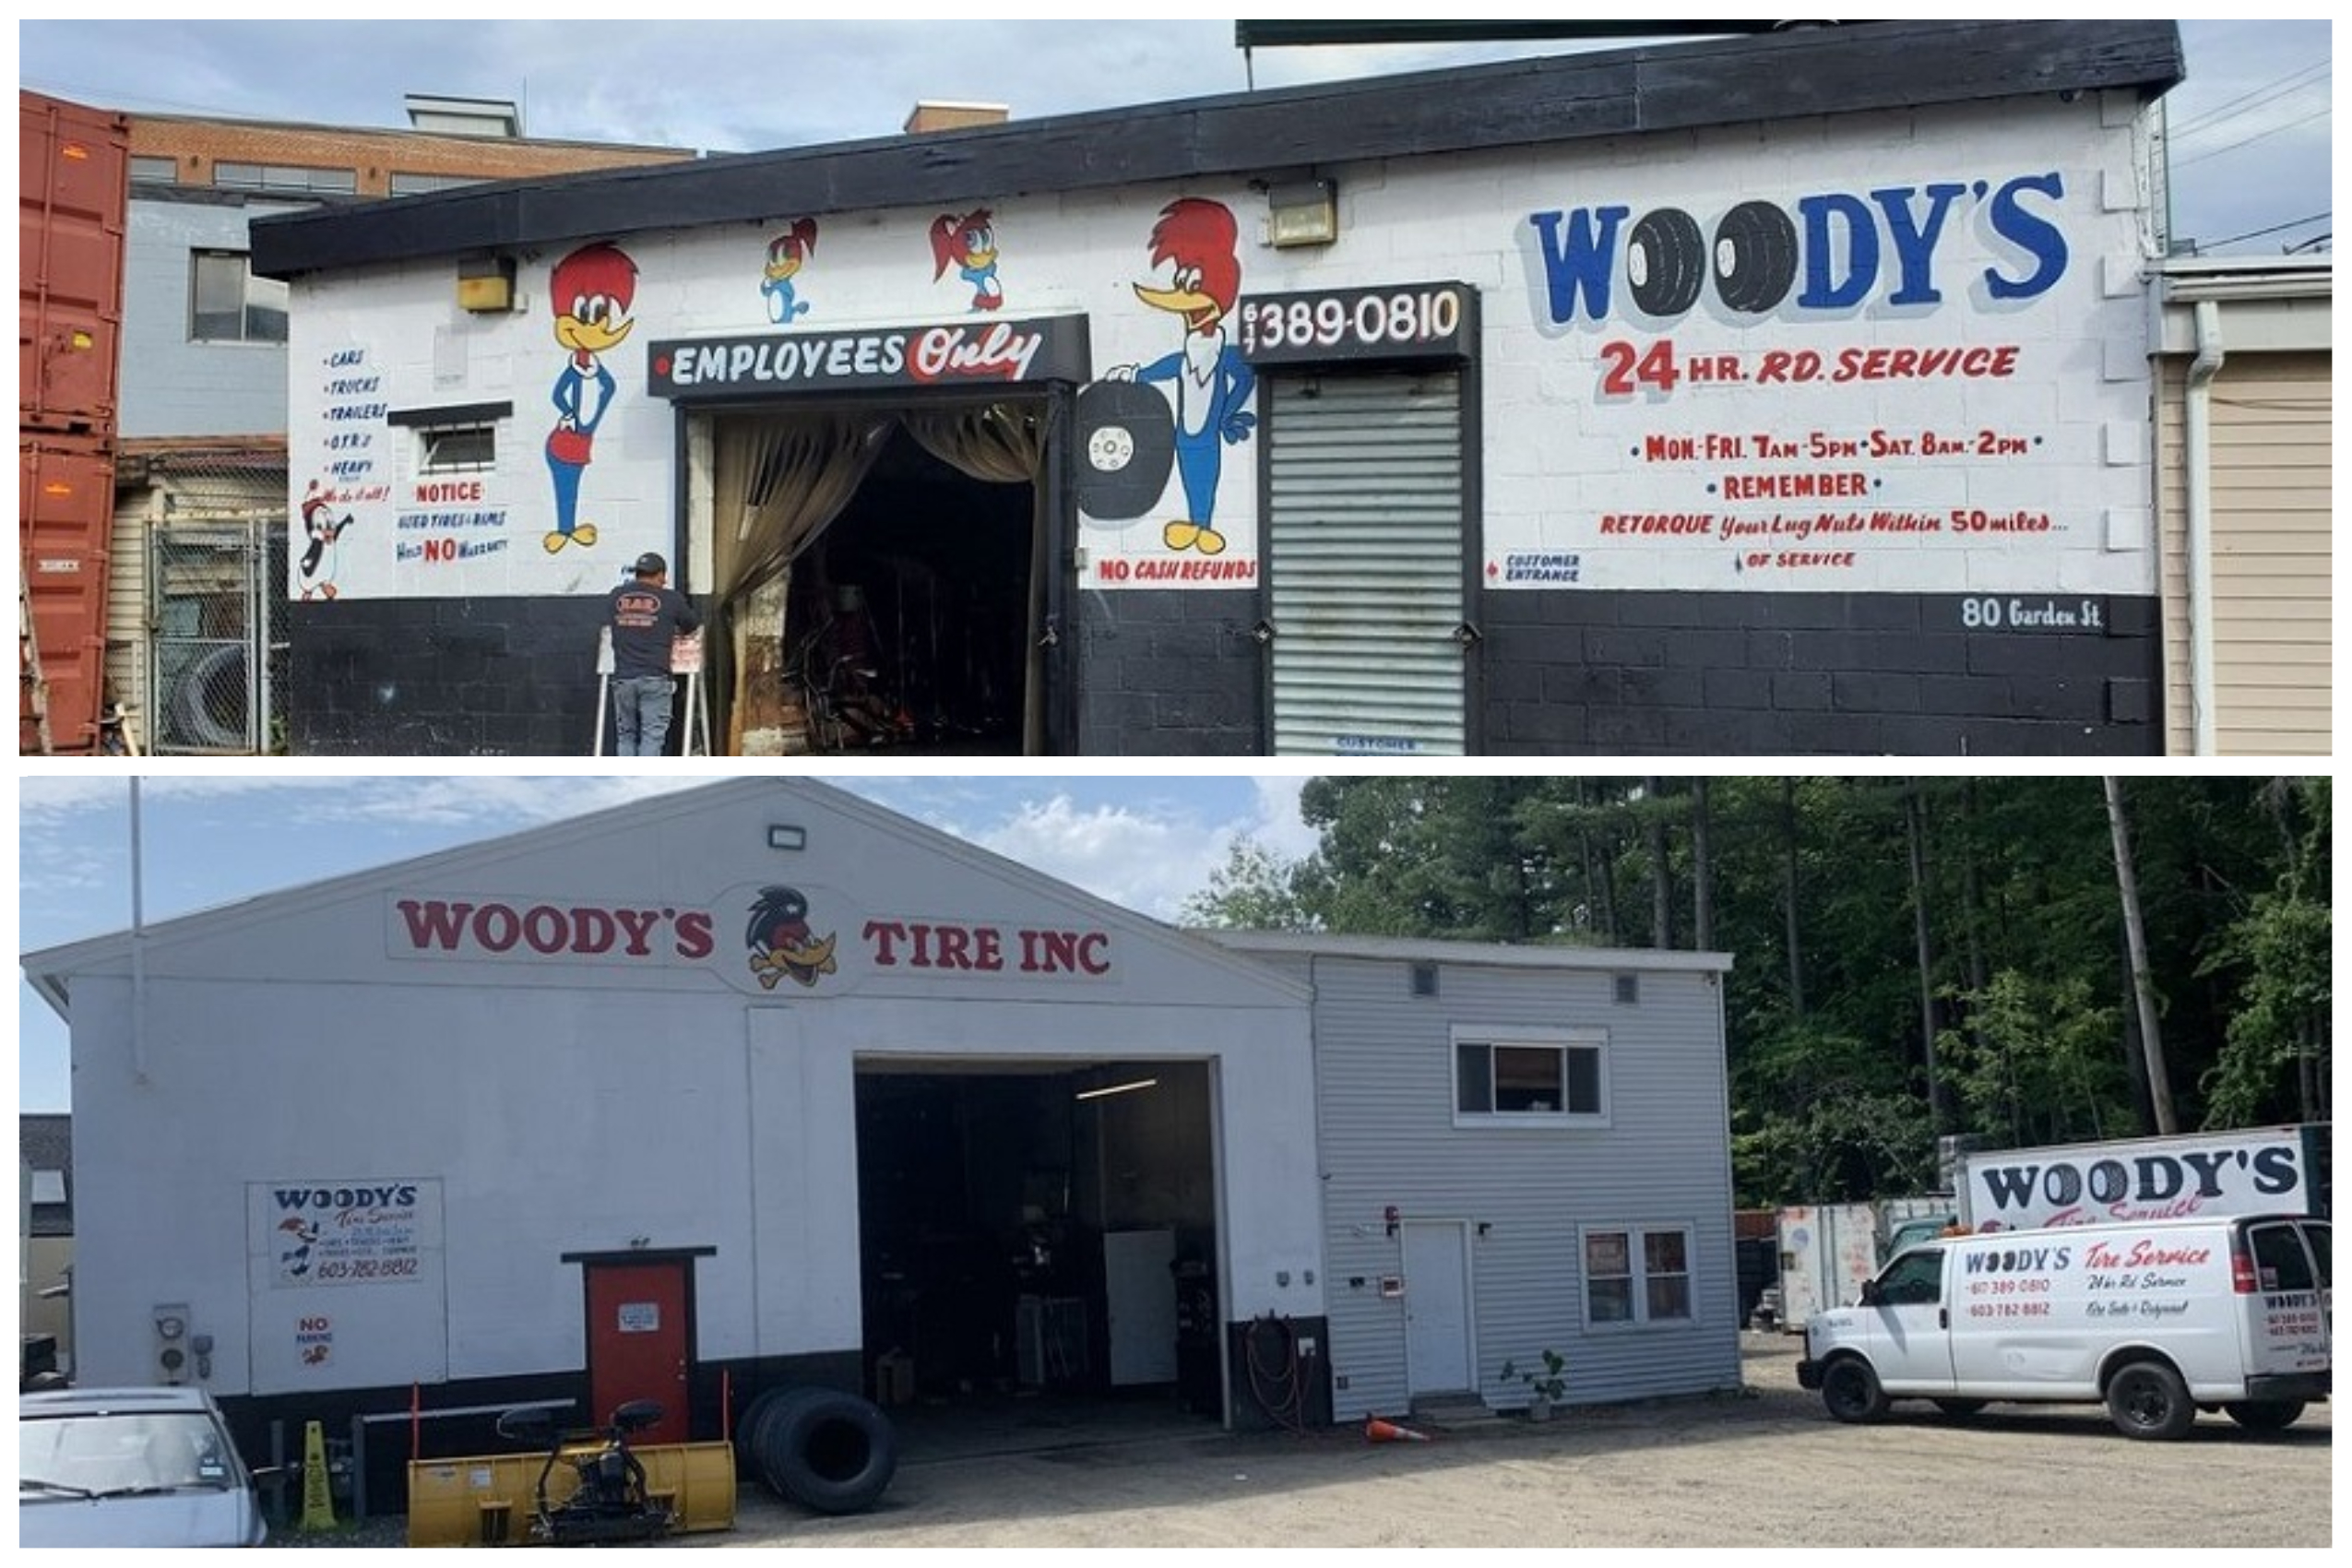 Welcome to woody's tire and auto repair in NH